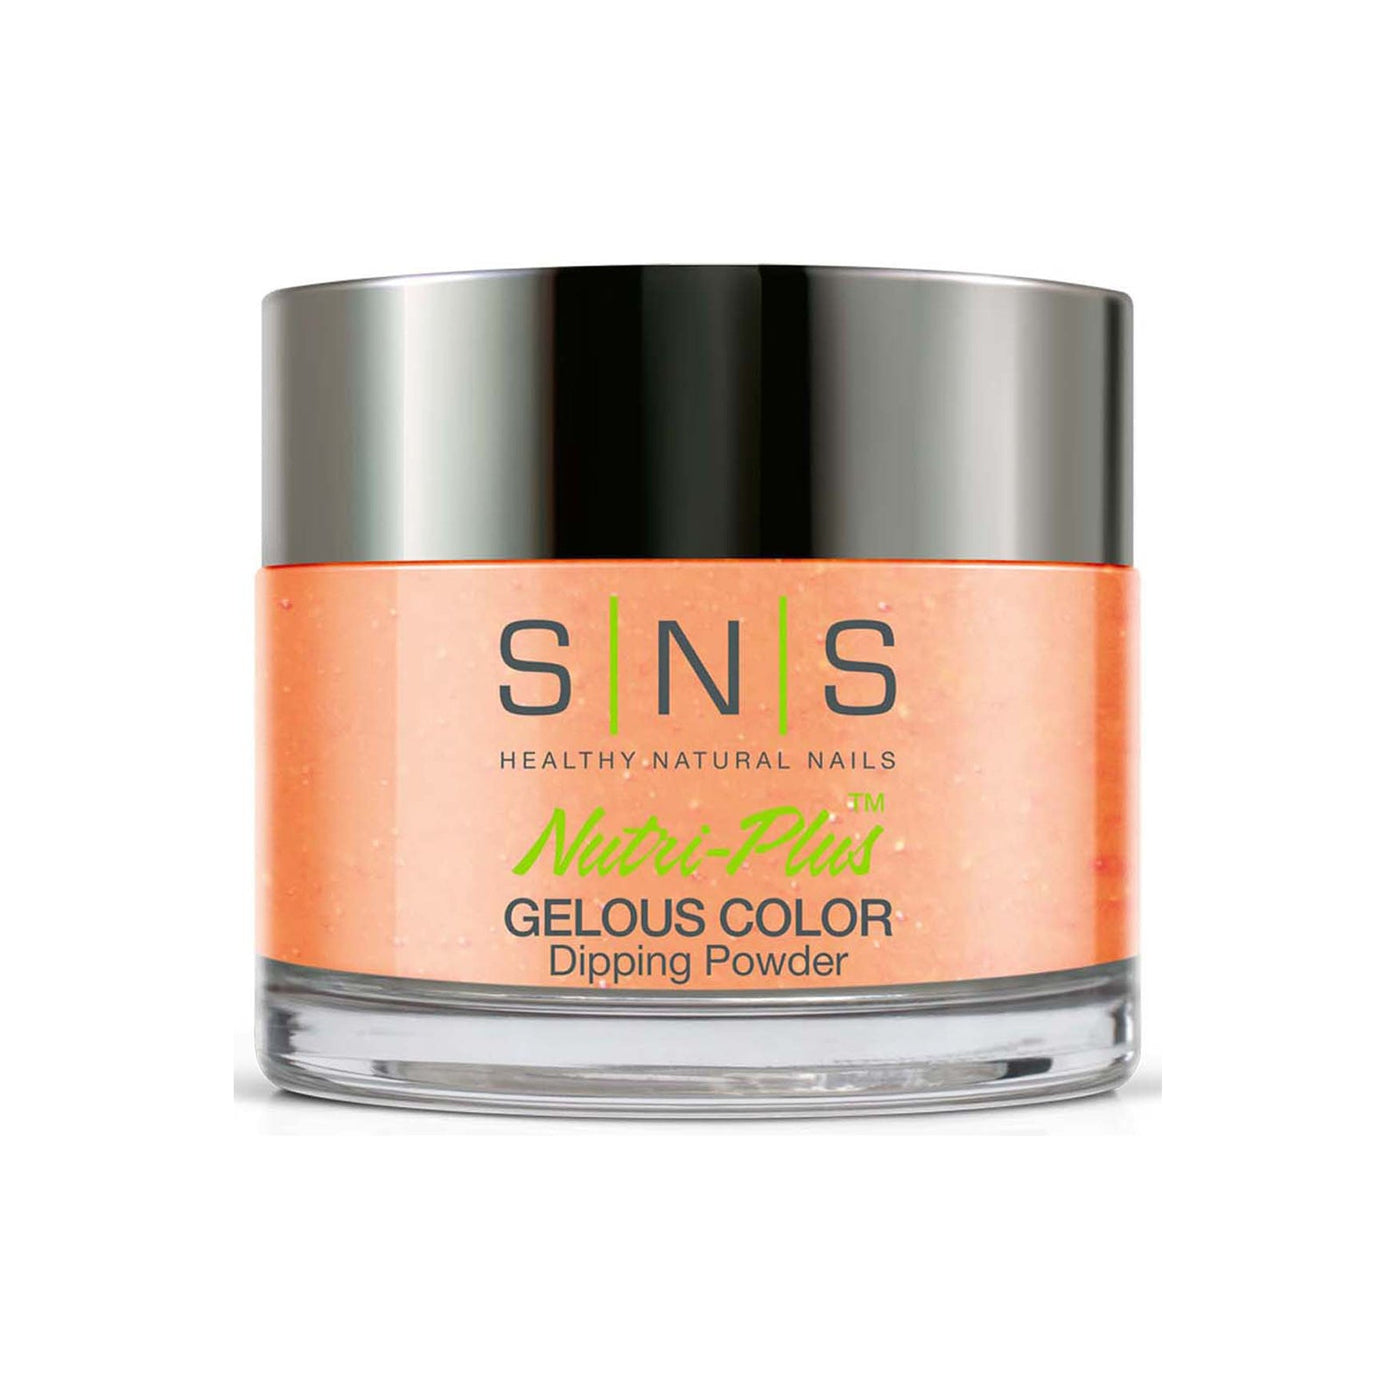 SNS Gelous Color Dipping Powder BD07 Satin Doll (43g) packaging